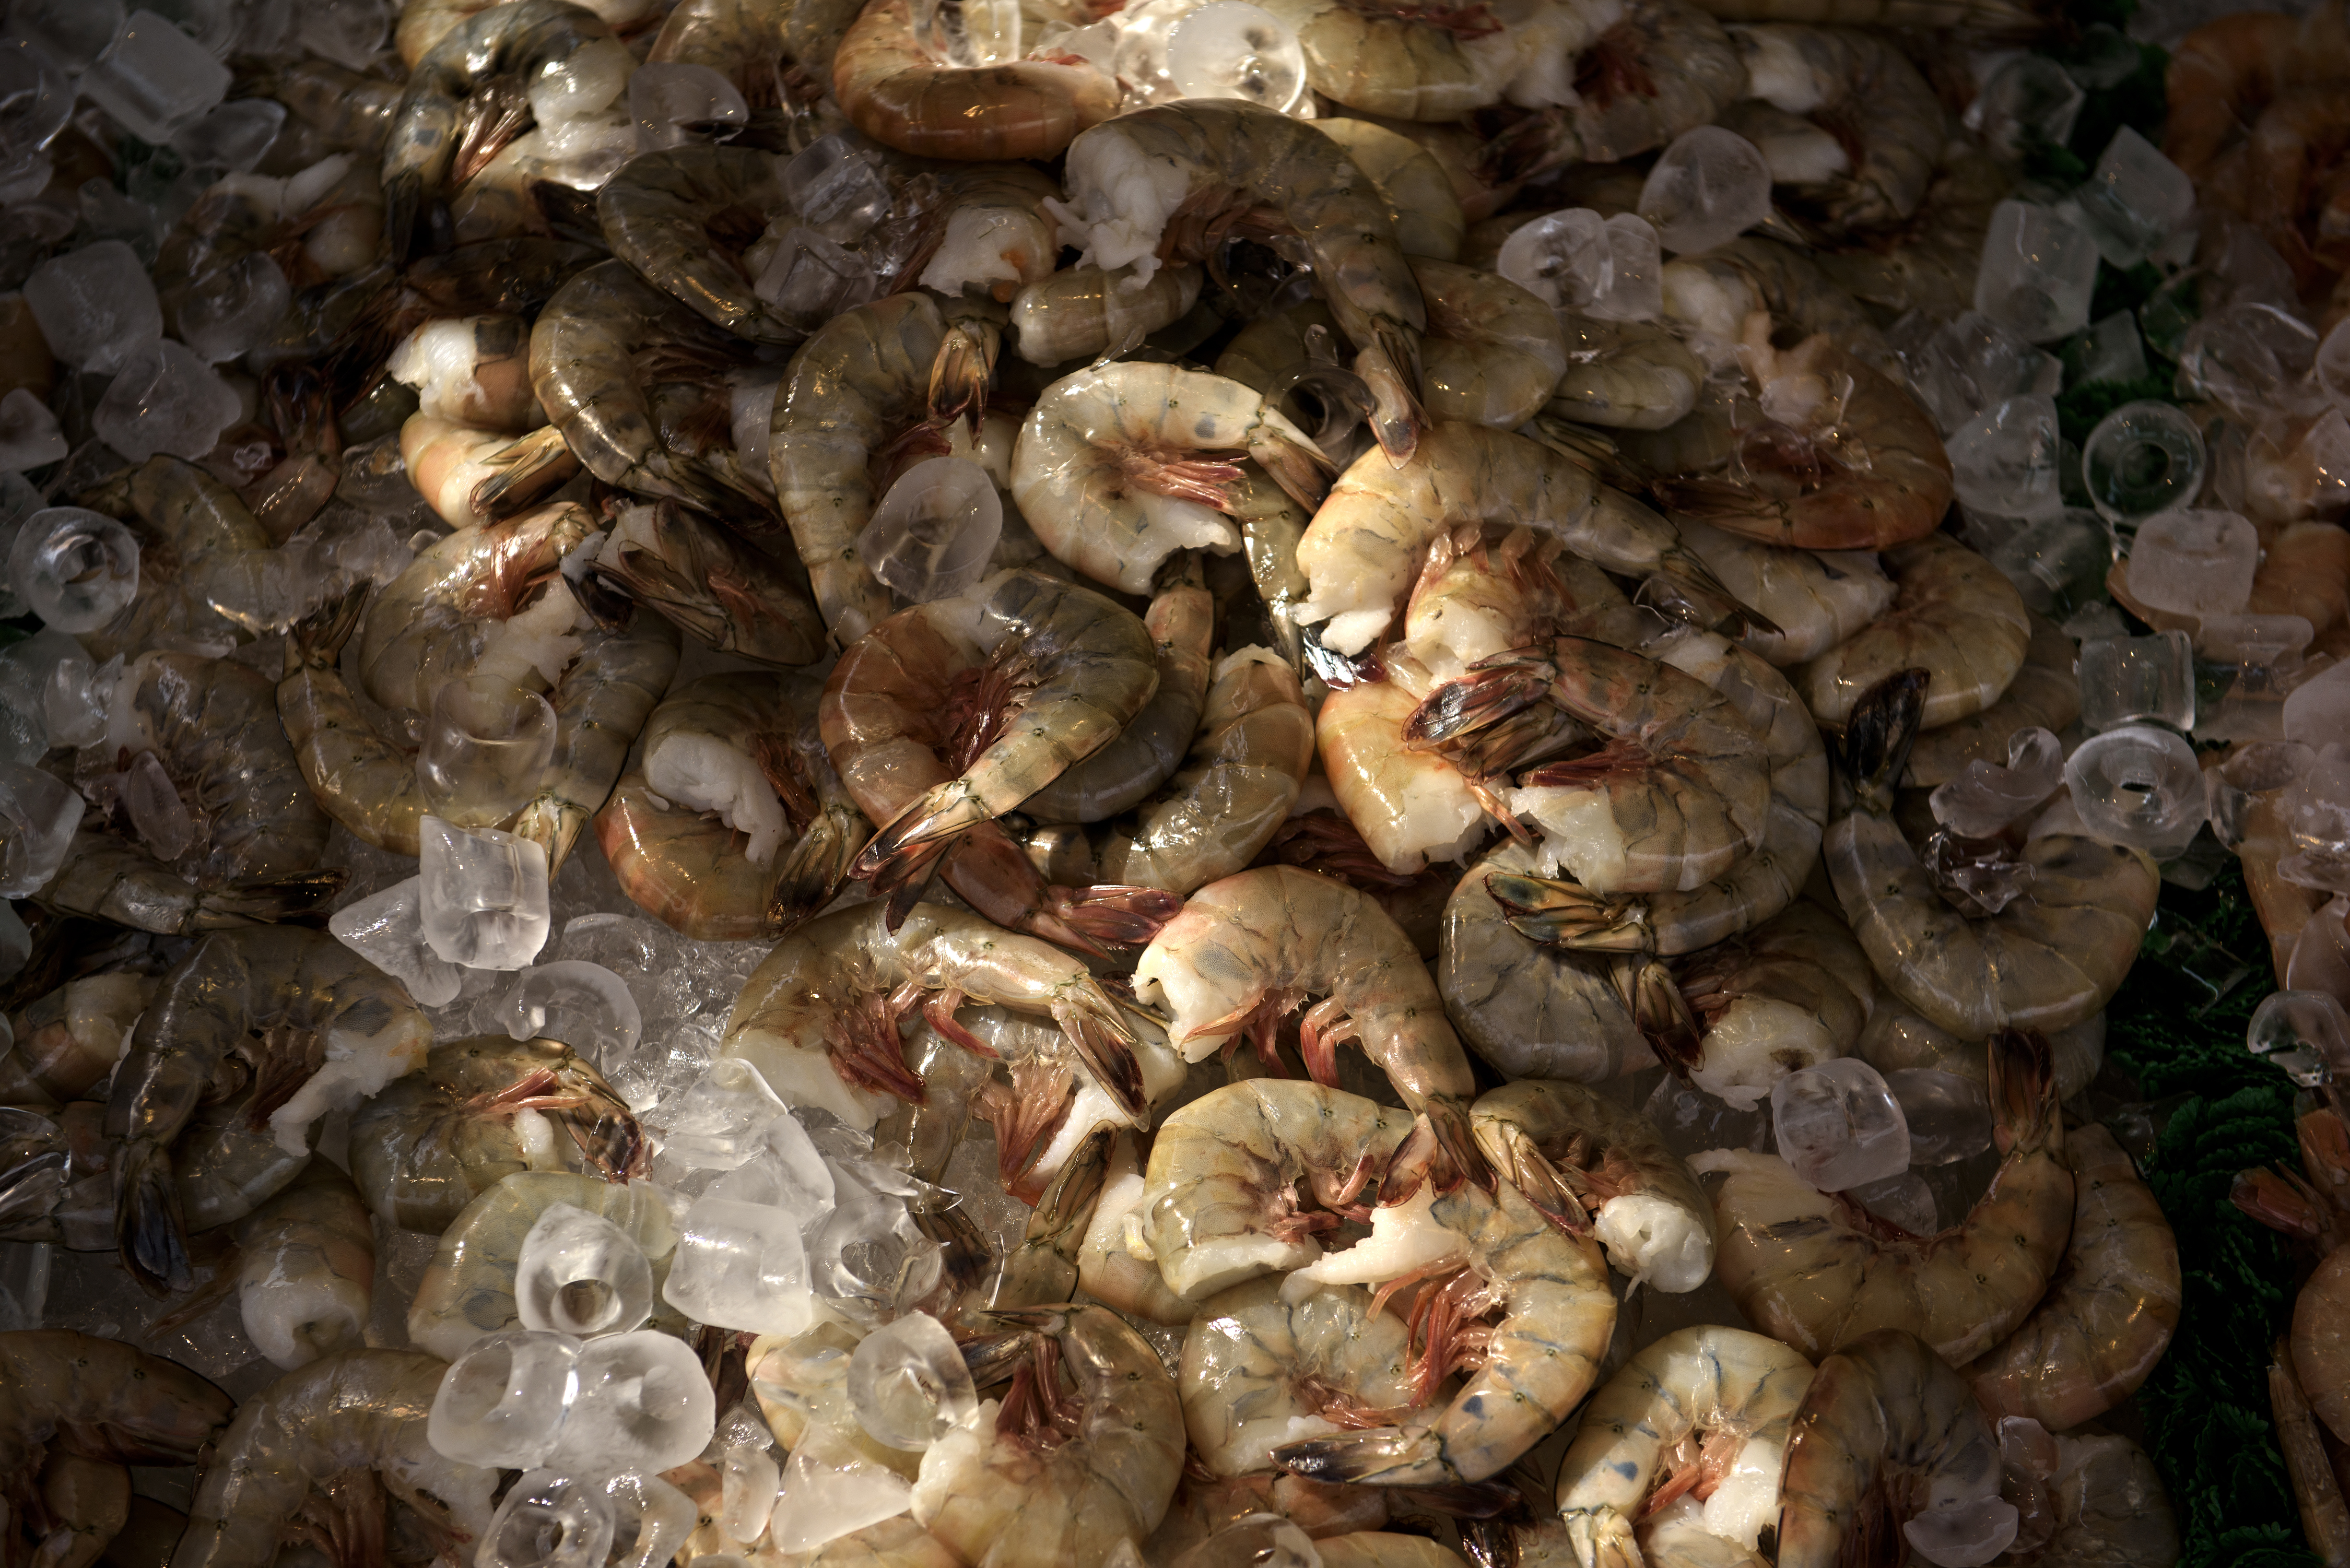 (FILES) This file photo taken on April 20, 2016 shows shrimp for sale at the Maine Avenue Fish Market in Washington, DC. The price of big-sized shrimp can rise as a direct result of pollution from fertilizers that cause dead zones in coastal waters, US researchers said on January 30, 2017. The study in the Proceedings of the National Academy of Sciences is the first to show how a low-oxygen water problem called hypoxia is related to the climbing price of seafood.  / AFP PHOTO / Brendan Smialowski